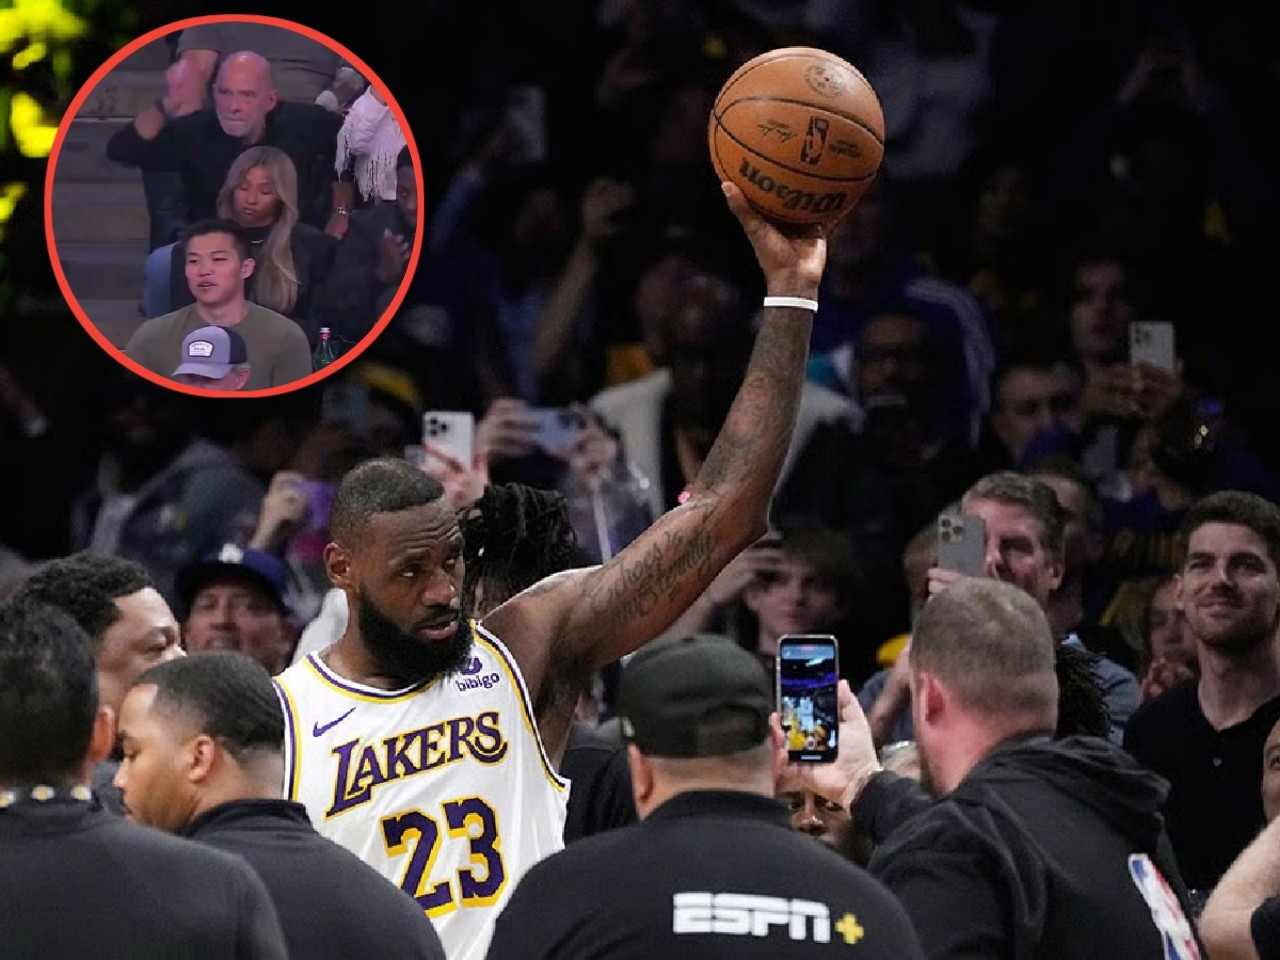 WATCH: “She wasn’t even paying attention” – Savannah James’ ‘casual’ reaction to husband LeBron James reaching 40,000 career points goes viral